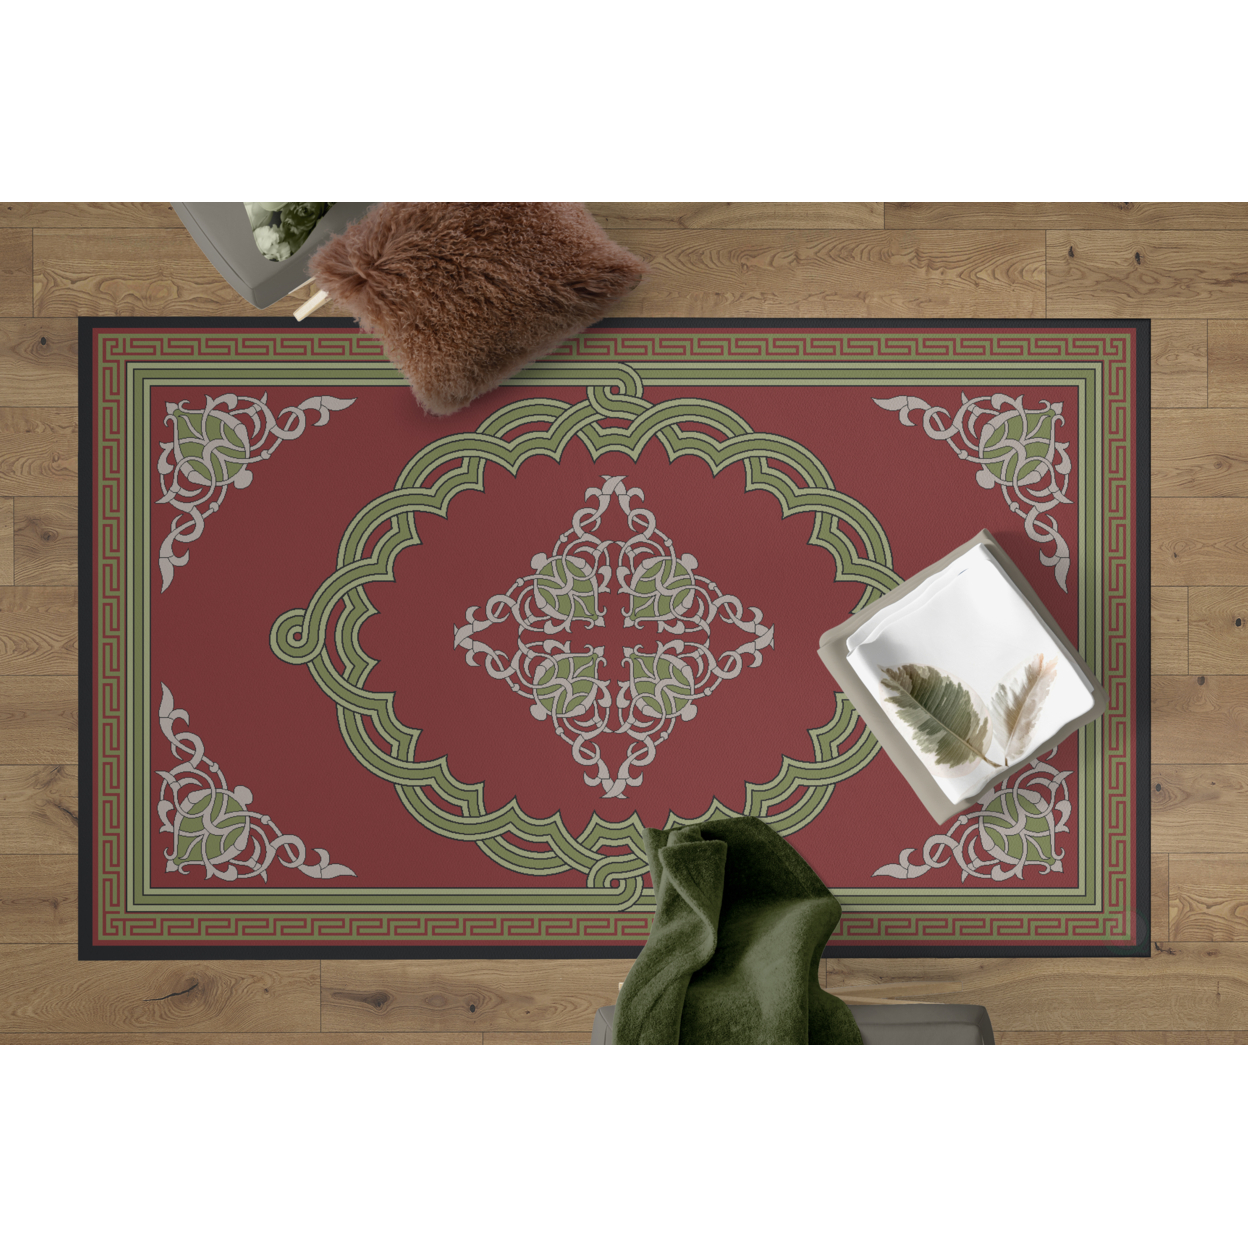 Deerlux Transitional Living Room Area Rug With Nonslip Backing, Red Medallion Pattern - 4 X 6